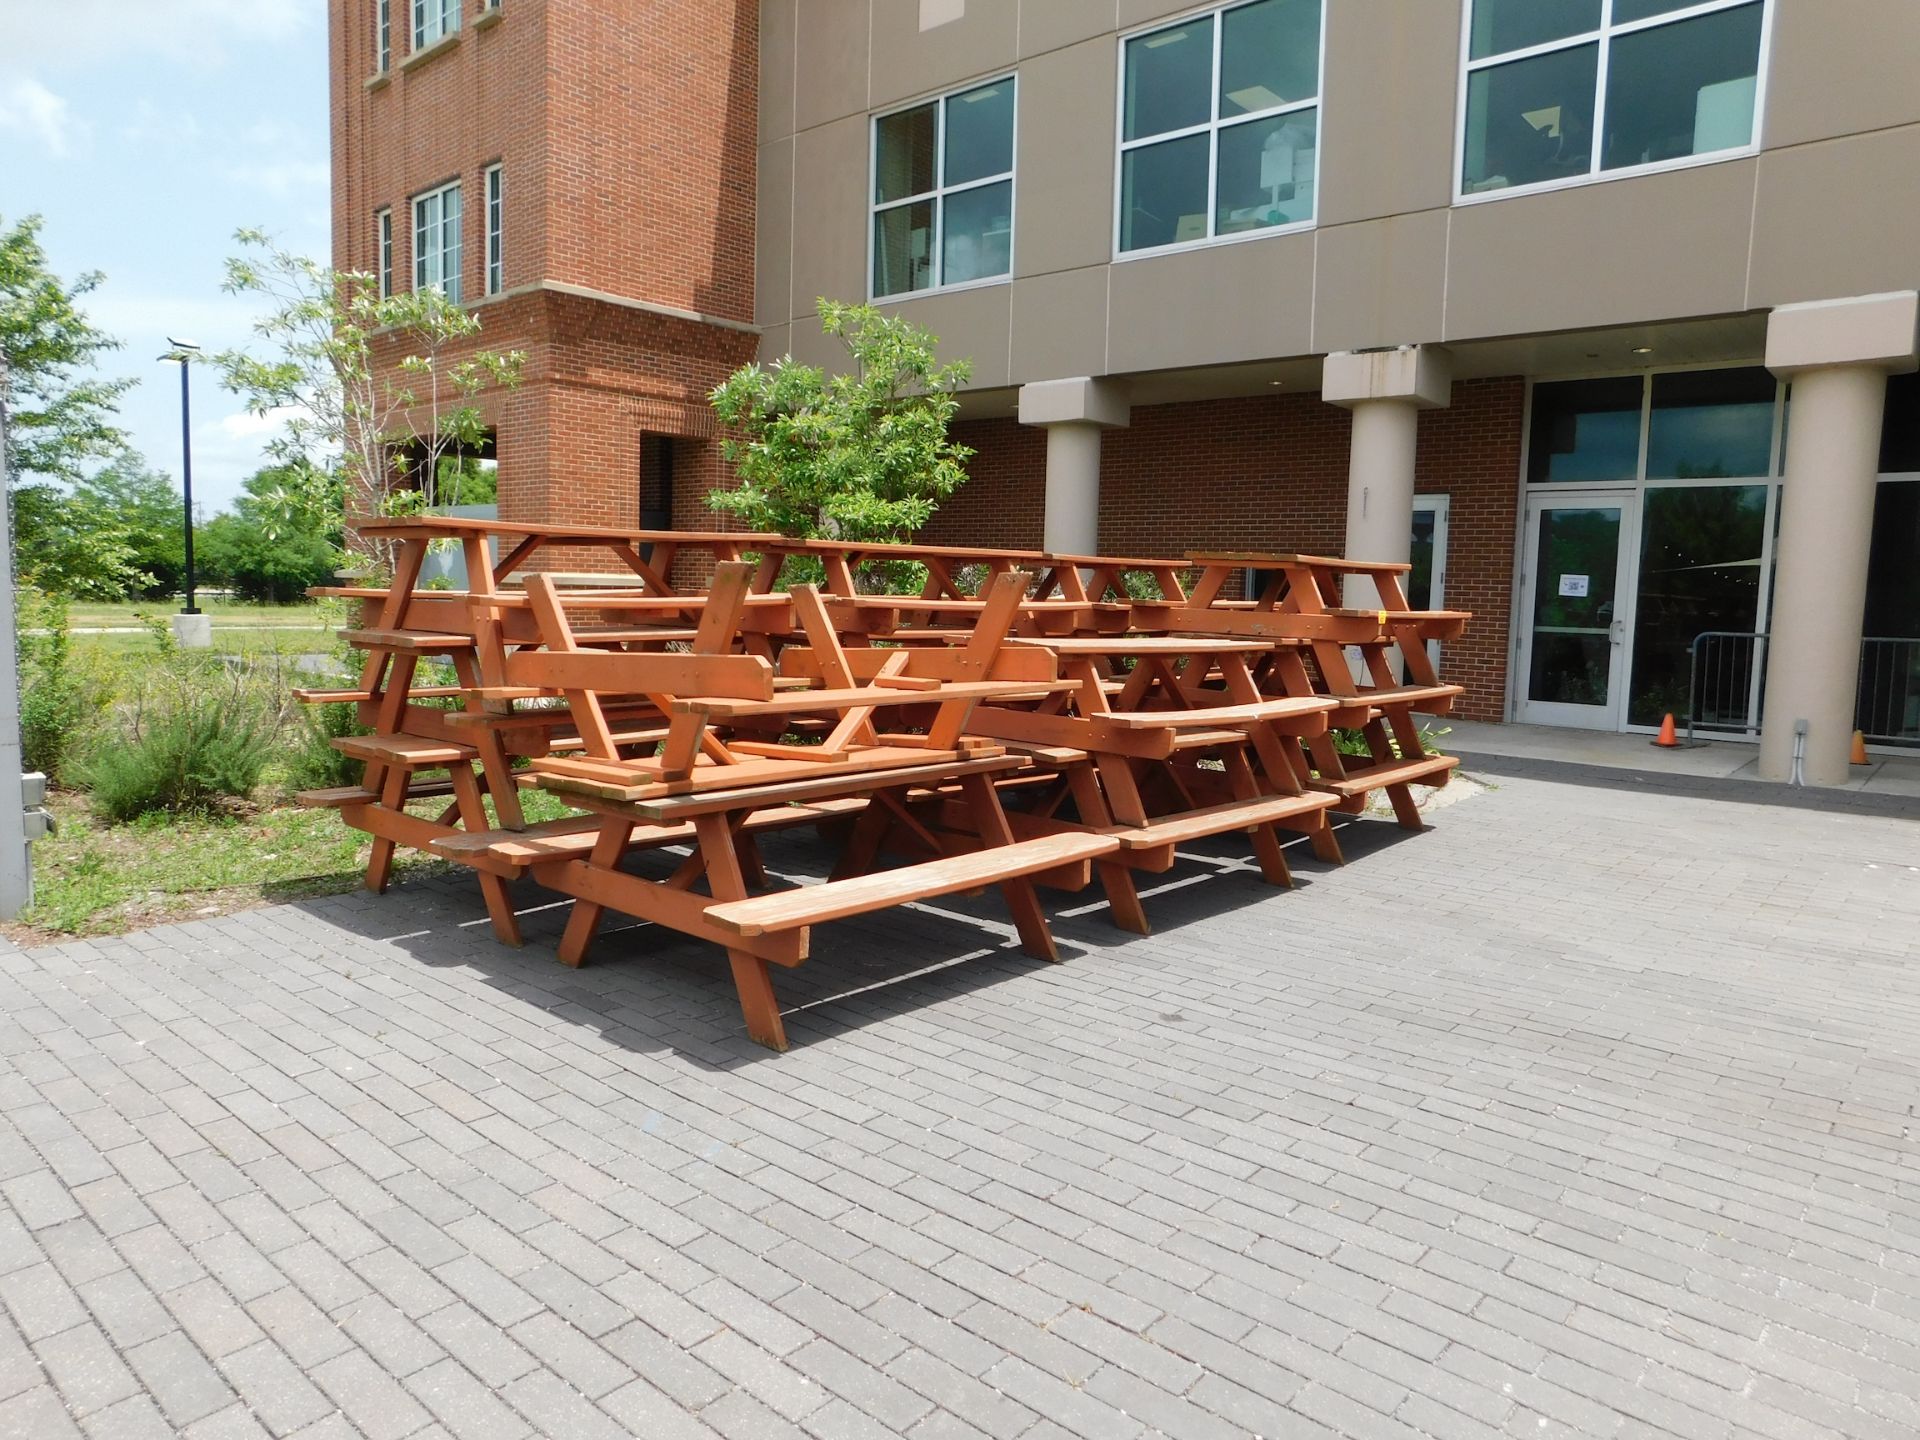 Picnic Tables - Image 2 of 2